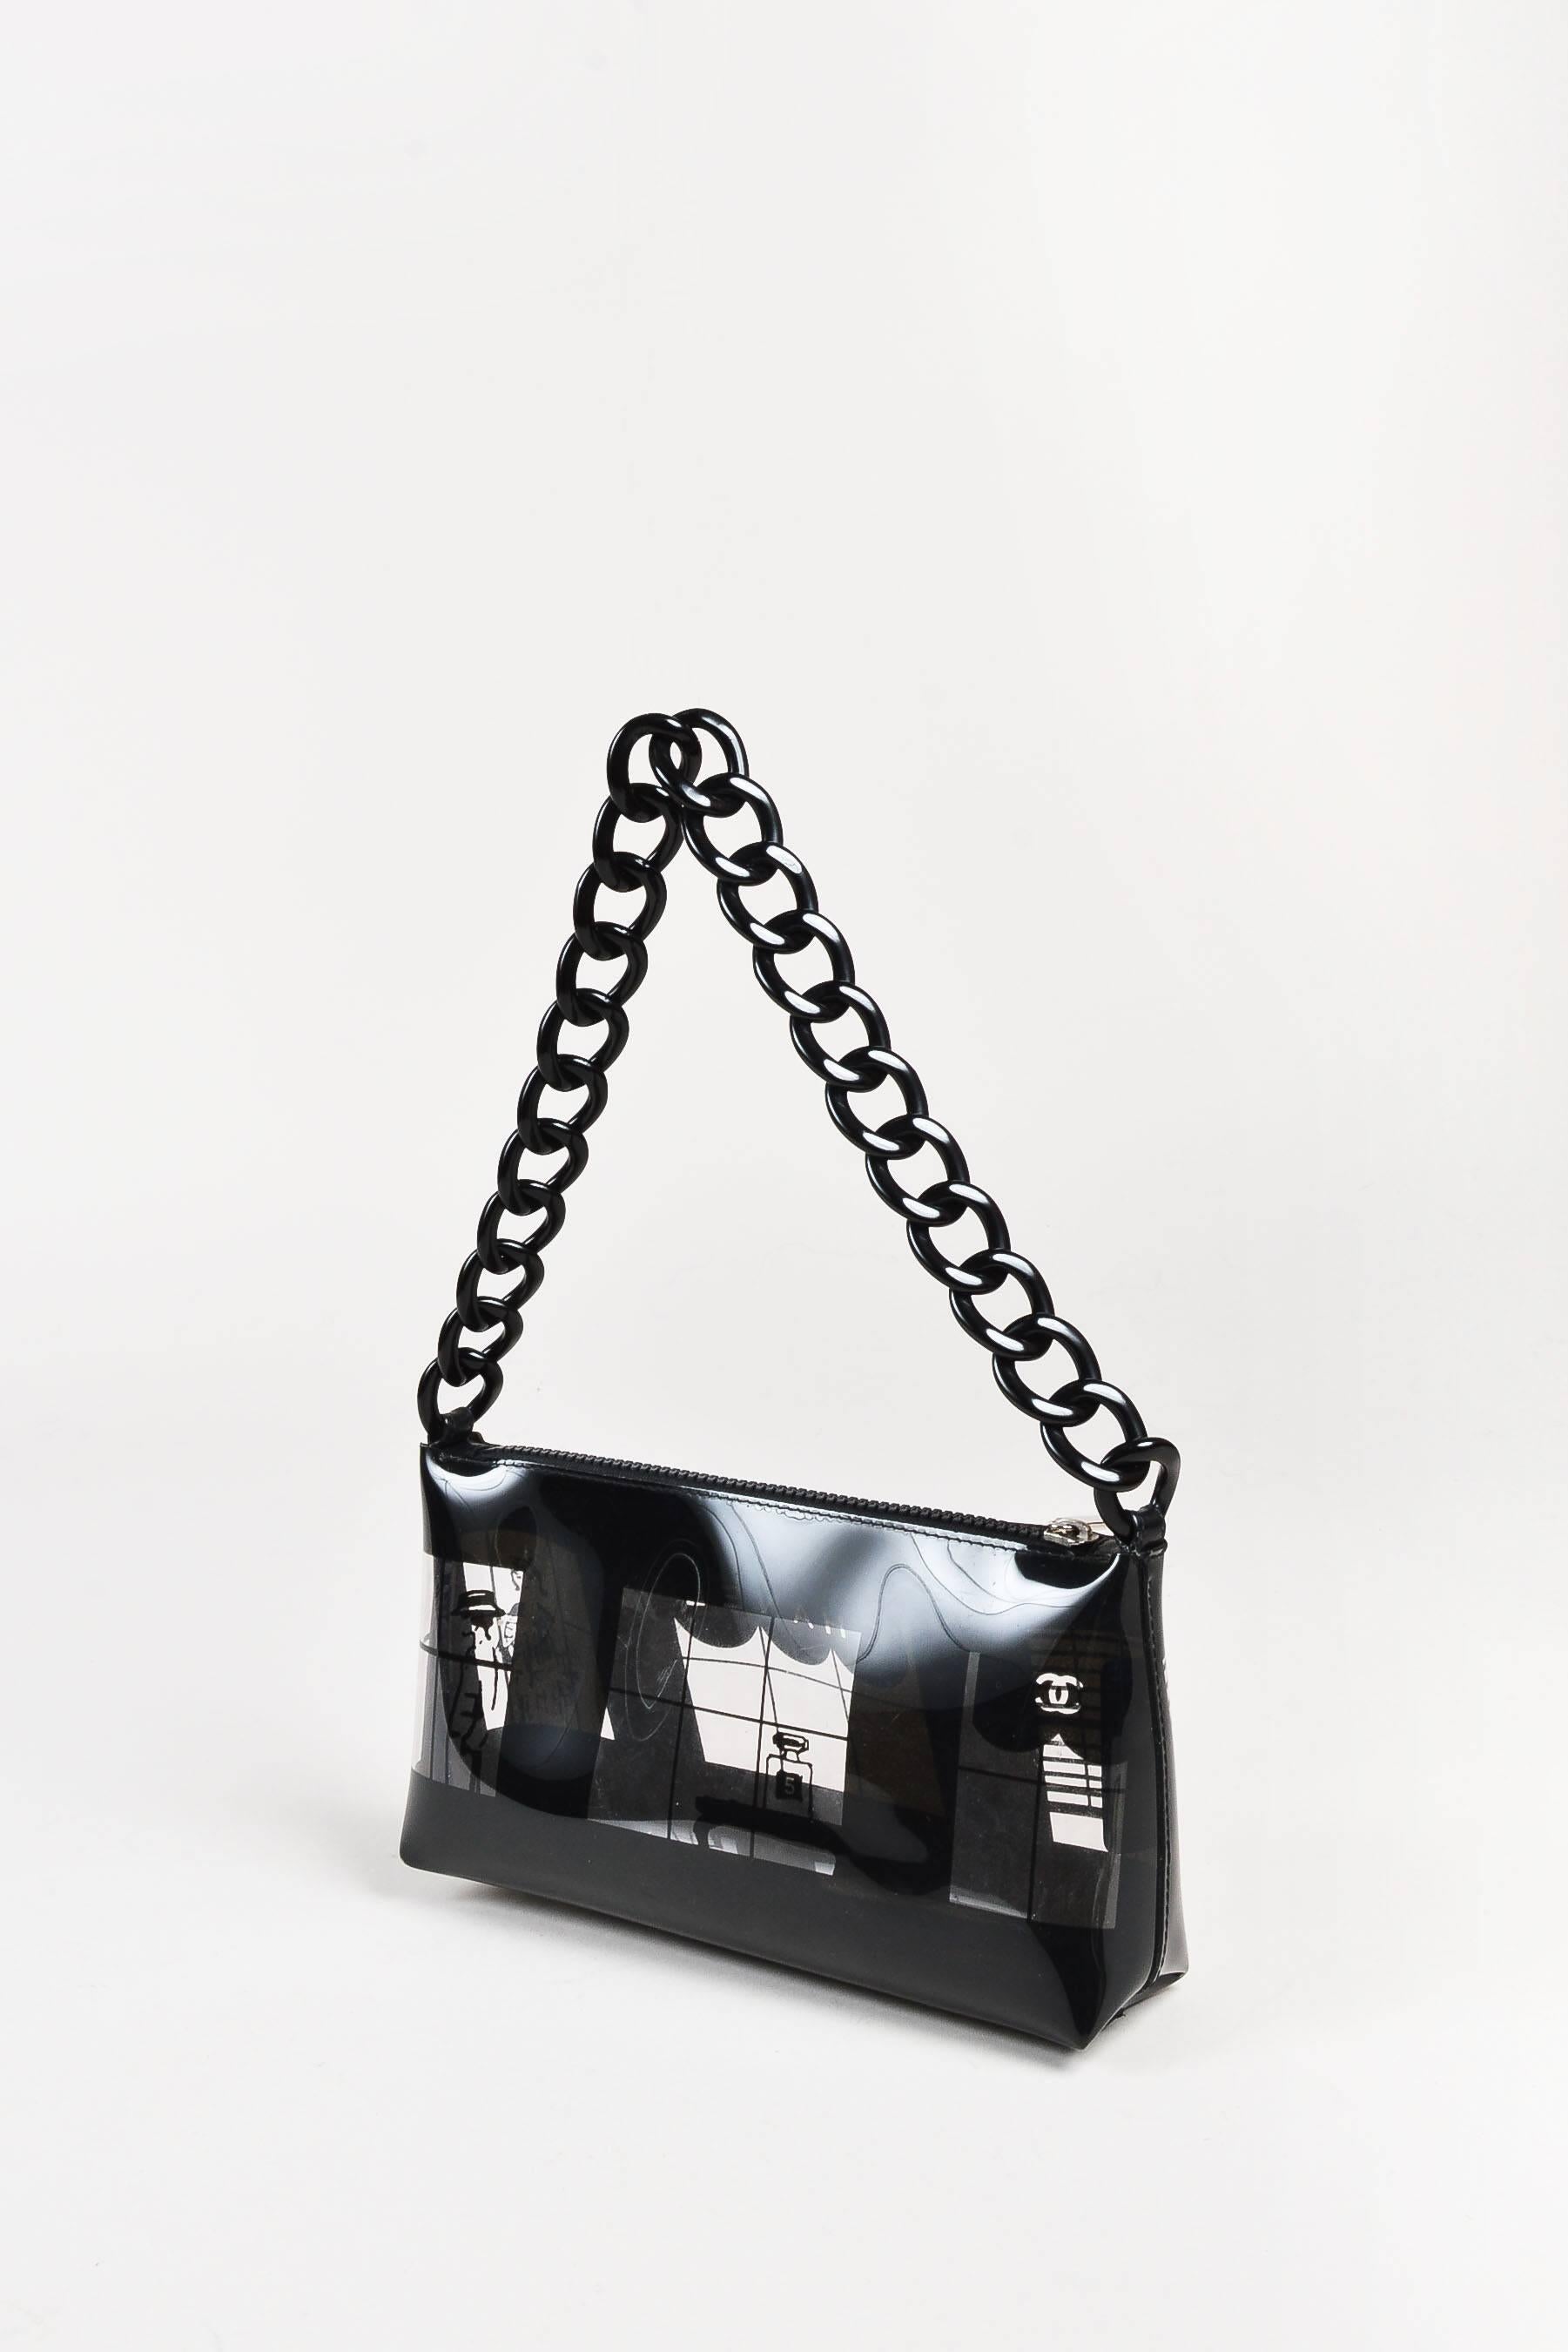 Chanel clear and black vinyl shoulder bag printed with a boutique window pane design along each wall. Featuring a playful twist on the brand's signature chain design, this bag features an acrylic chain link strap. Zip top closure. Silver-tone metal